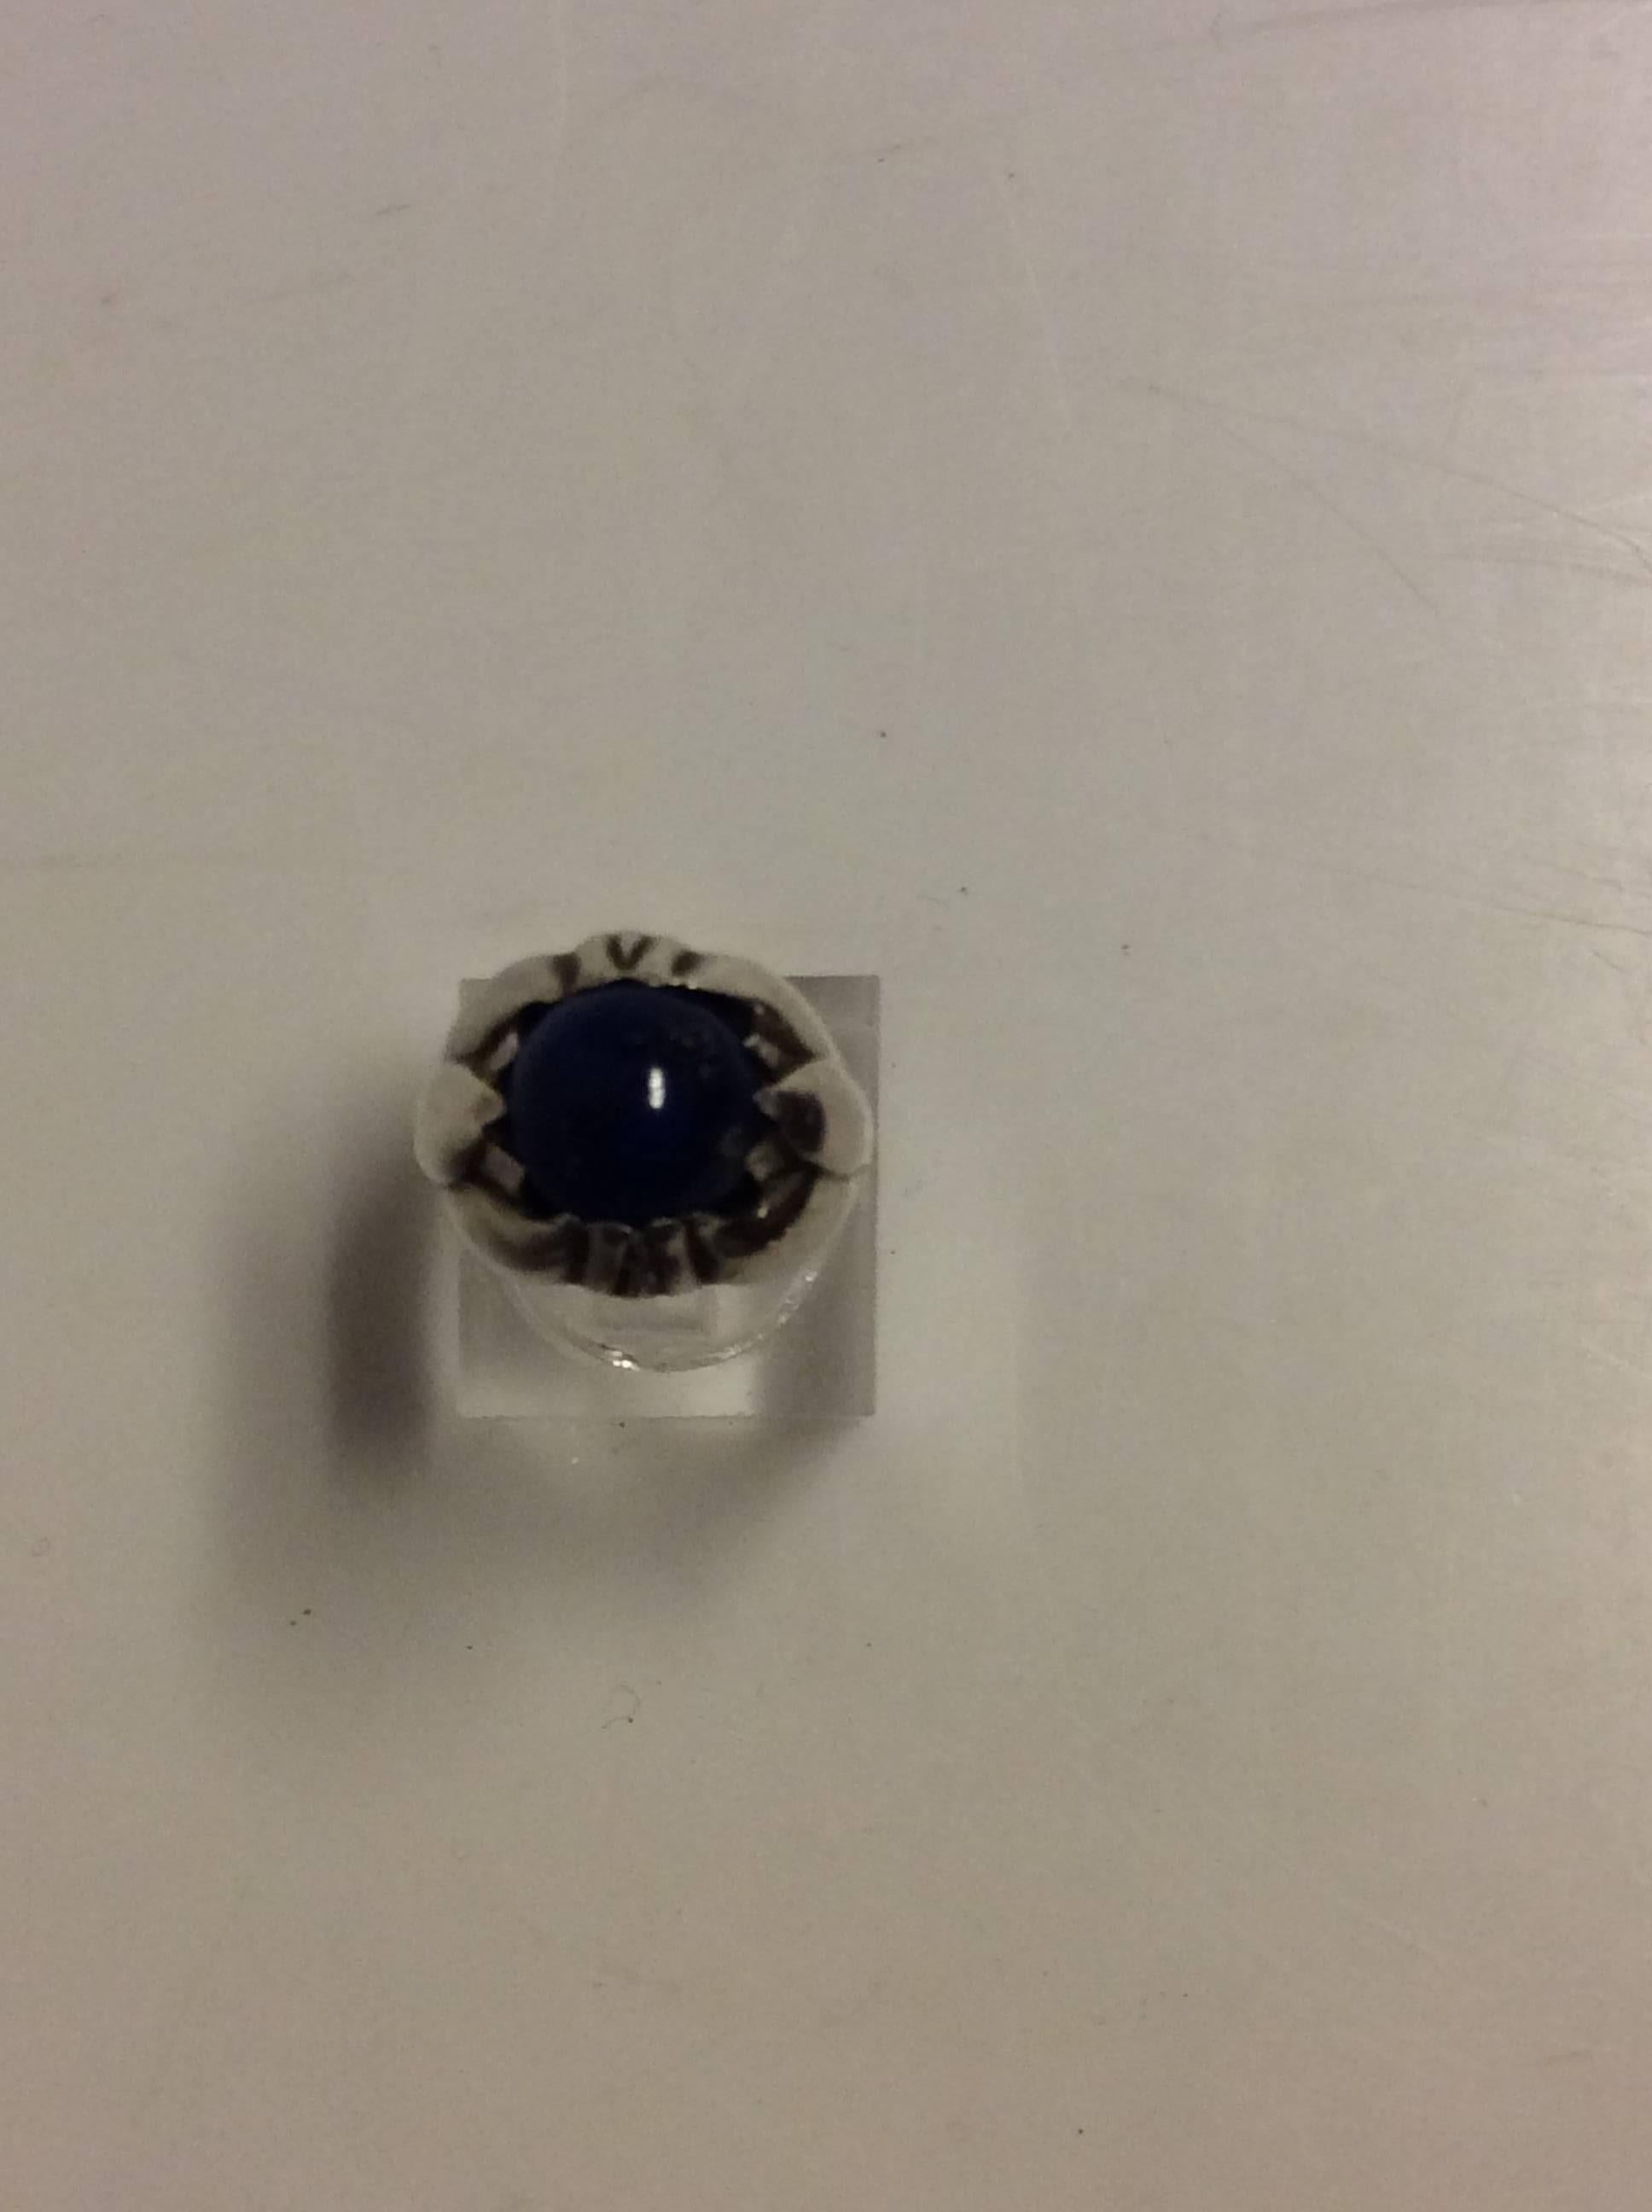 Georg Jensen Sterling Silver Ring with Lapis Lazuli from 1933-1944 no. 59

Ring size is 48 or US 4 1/2 

Weight is 5.24 grams / 0.185 oz.